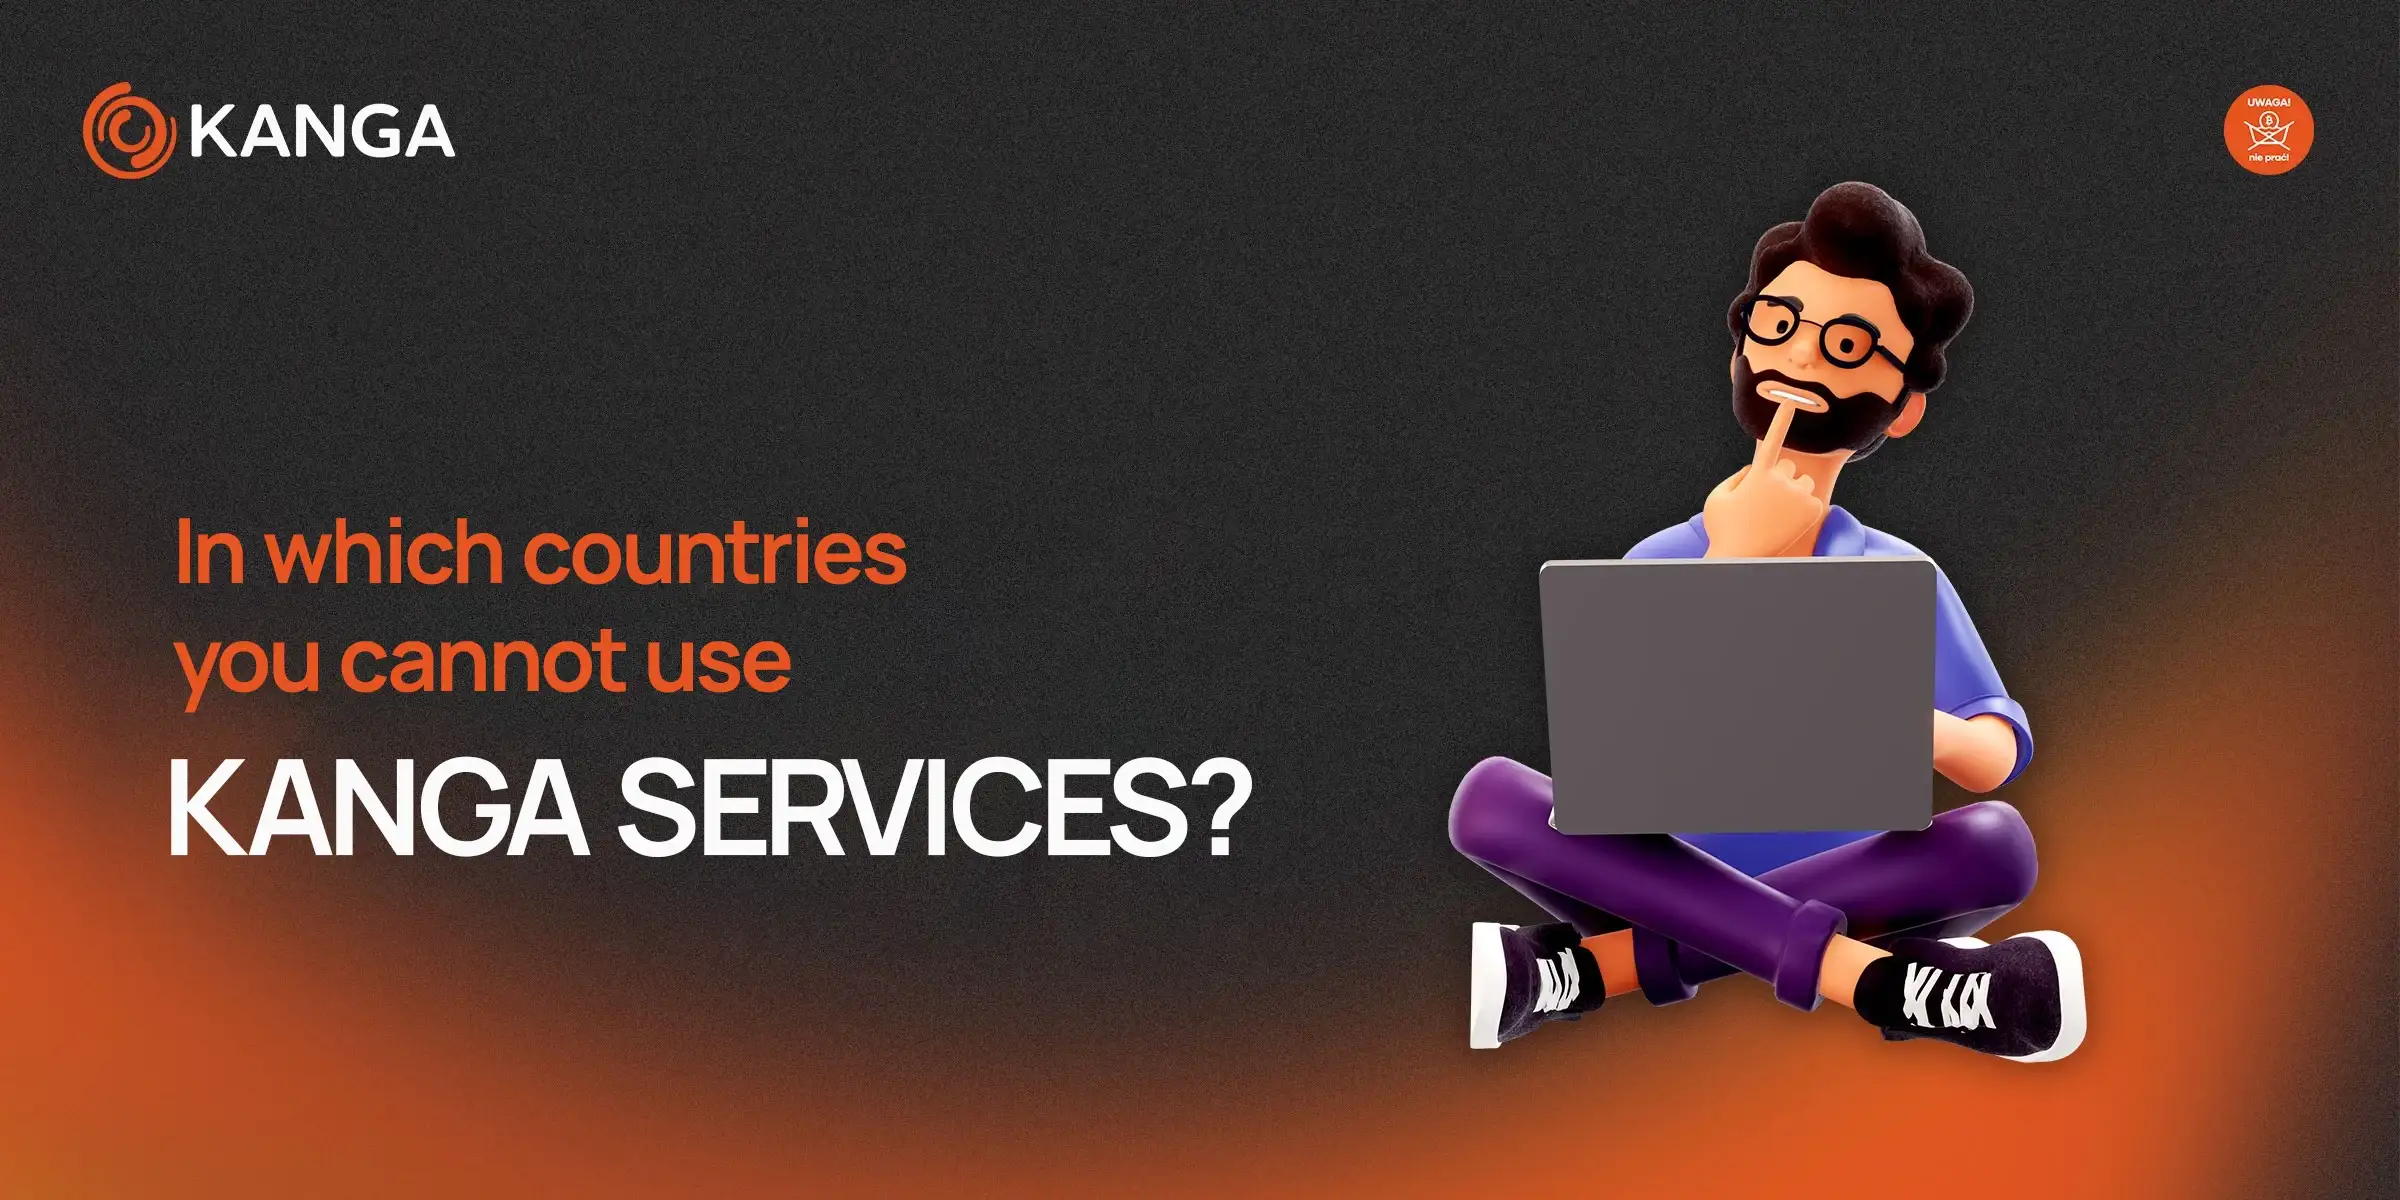 In which countries you cannot use our services?